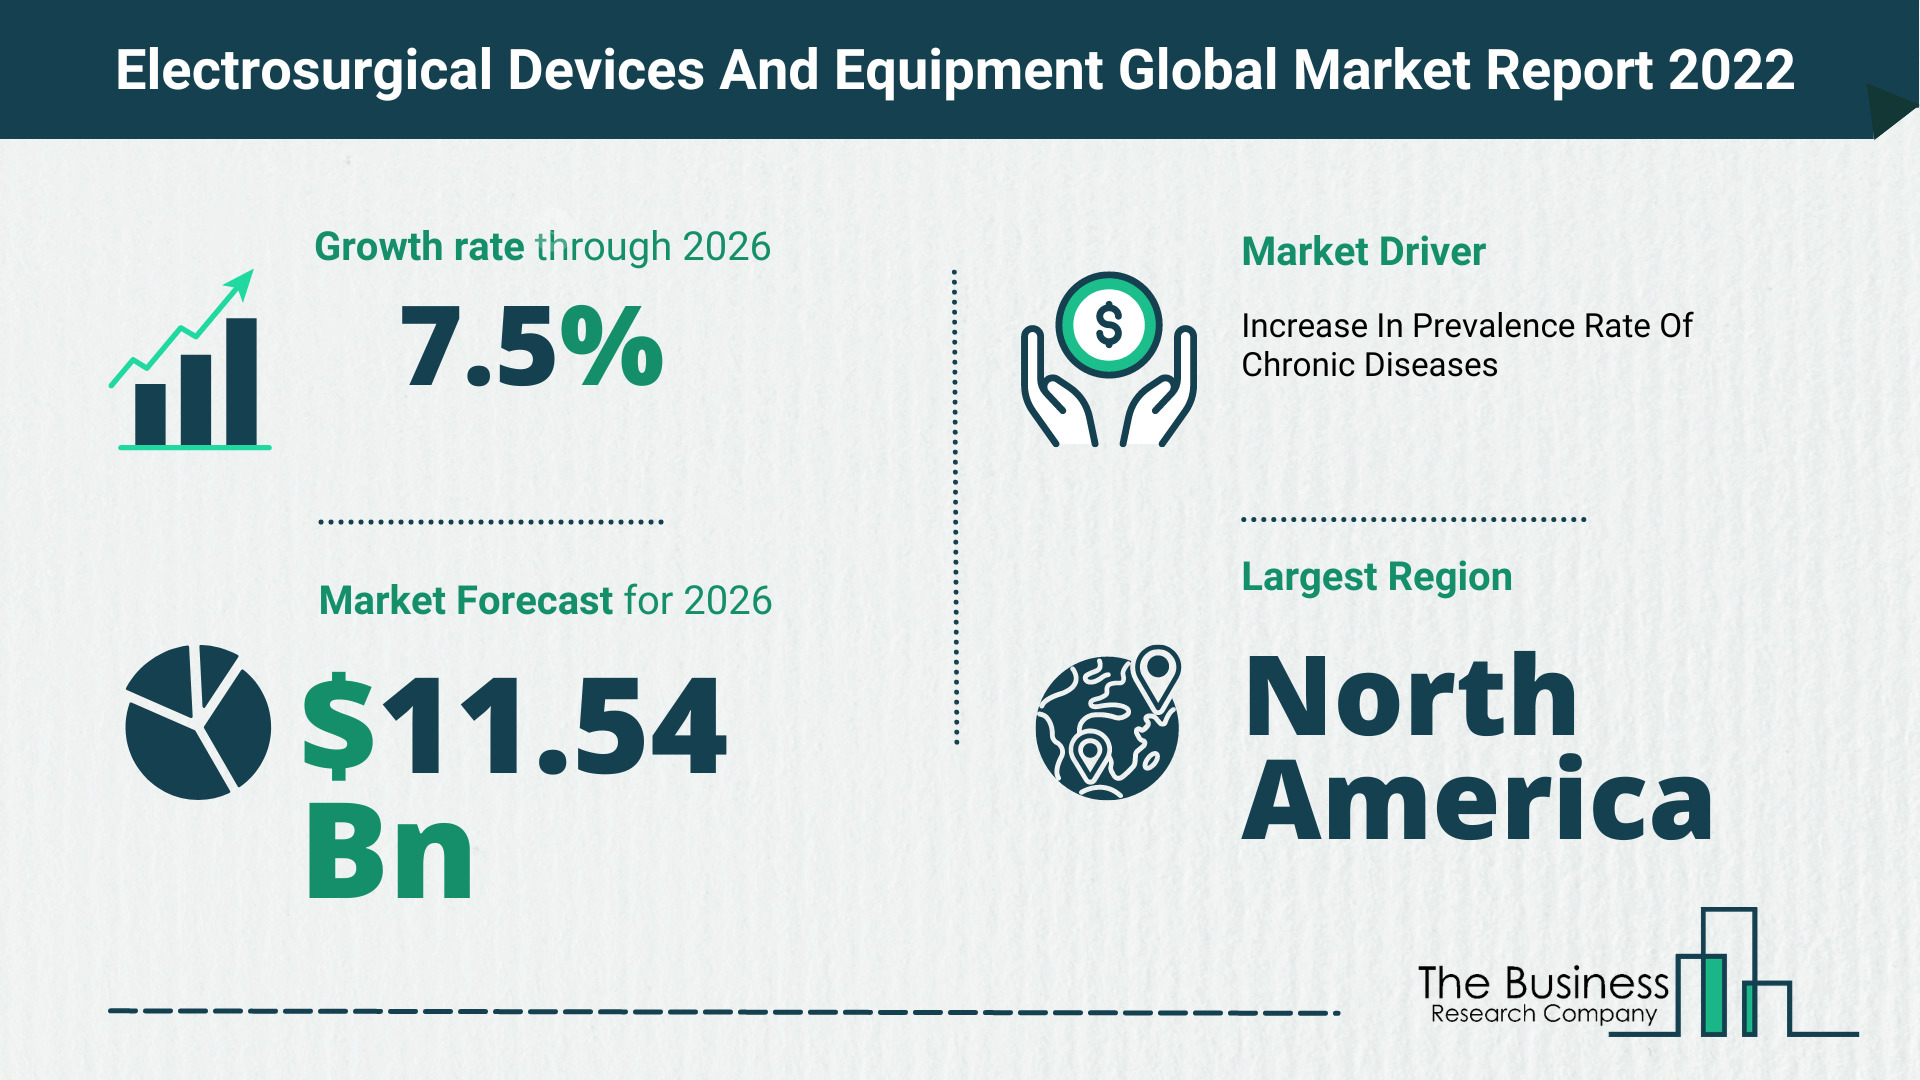 The Electrosurgical Devices And Equipment Market Share, Market Size, And Growth Rate 2022